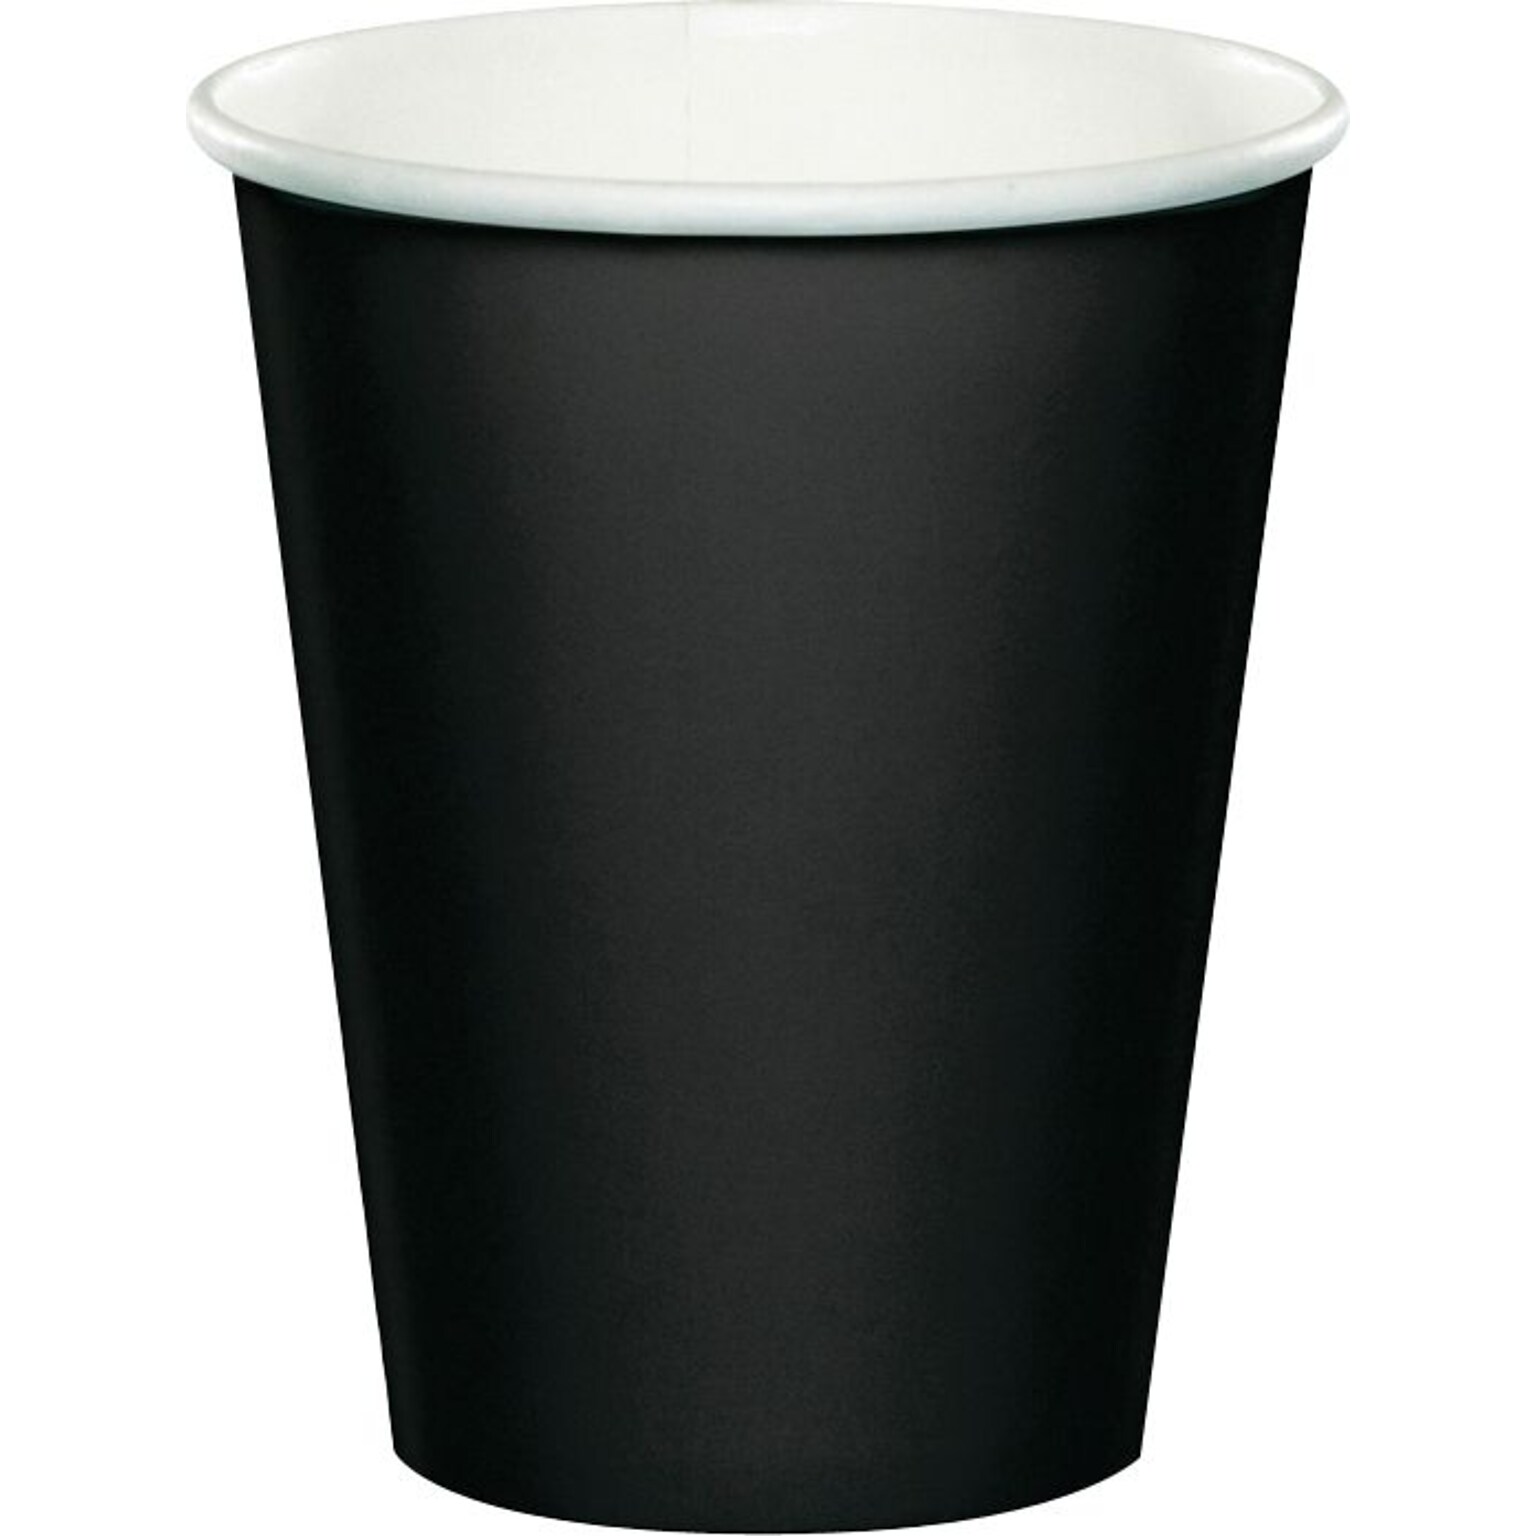 Creative Converting Cups, Black, 72/Pack (DTC56134BCUP)